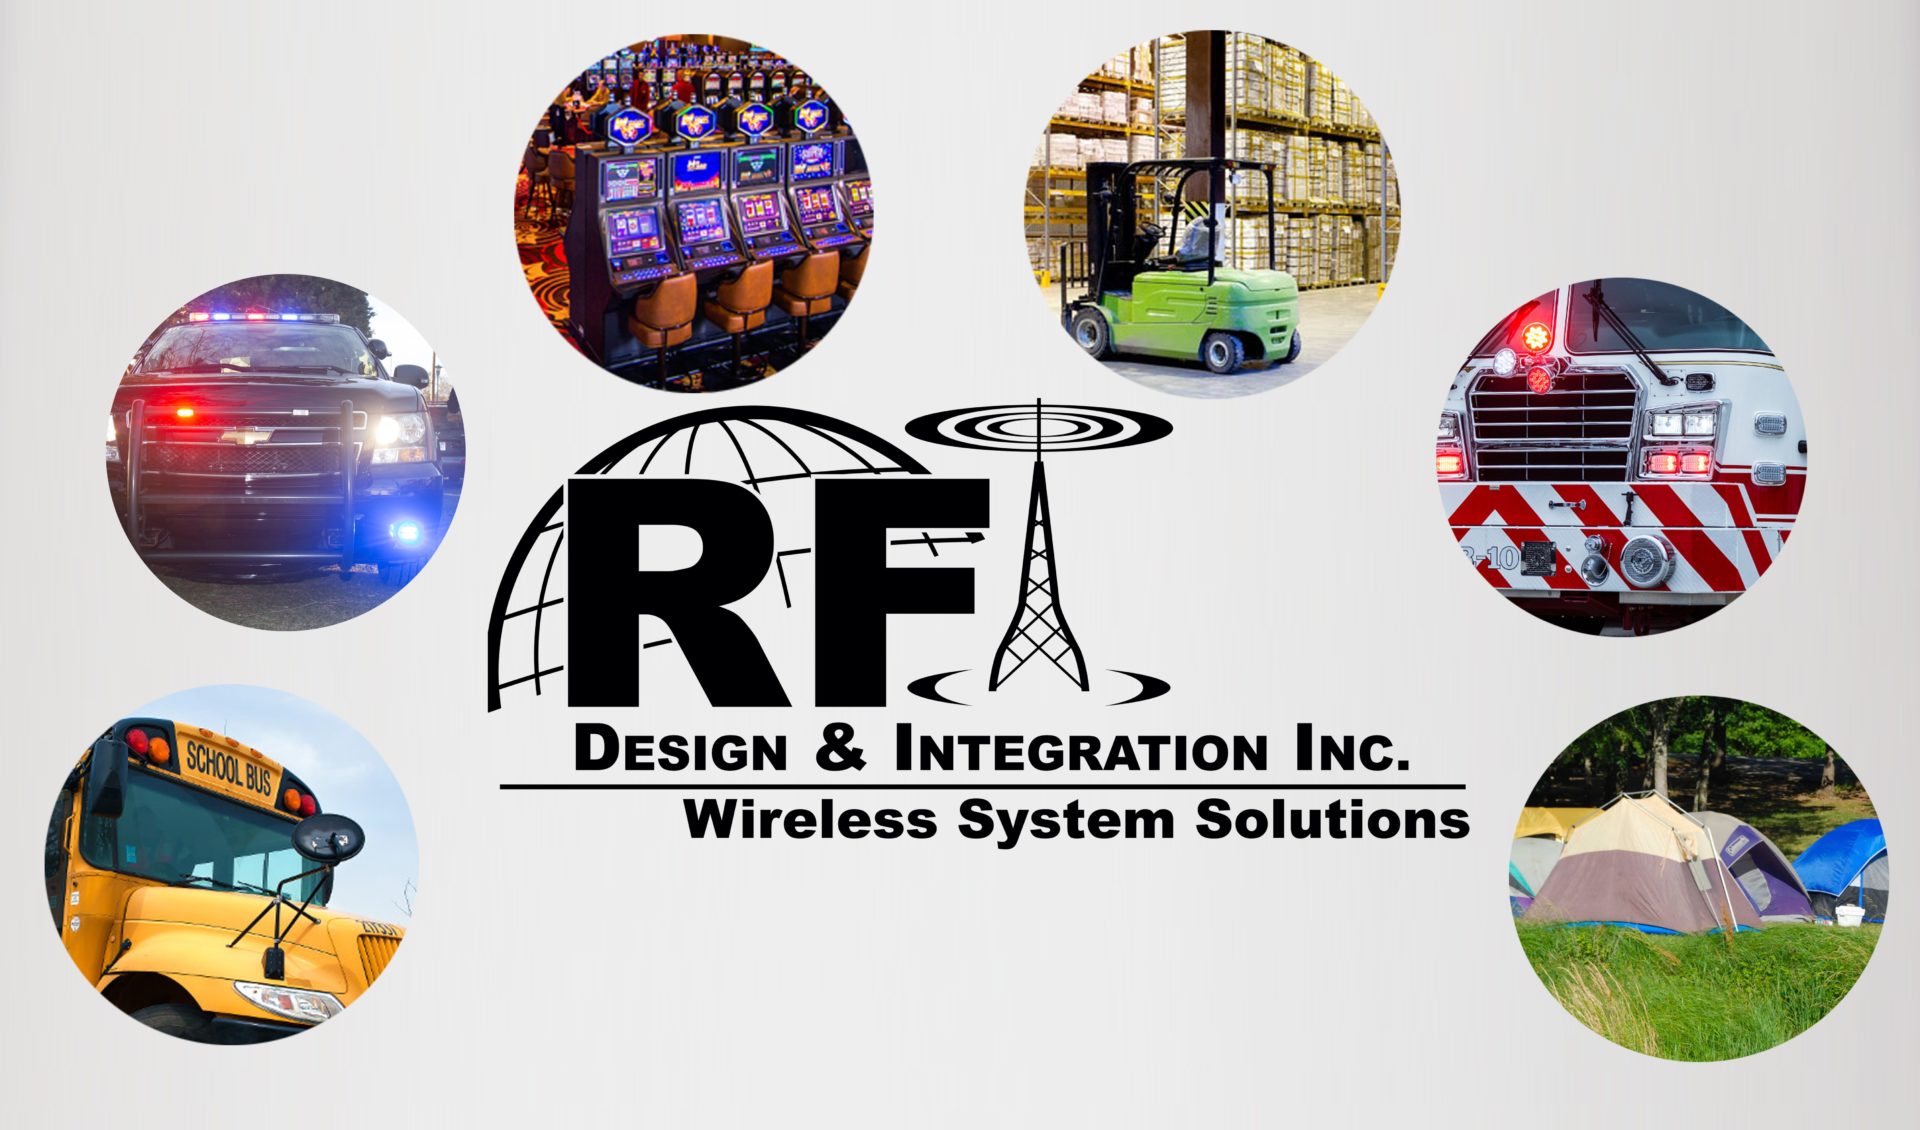 RF Logo and Services pictures